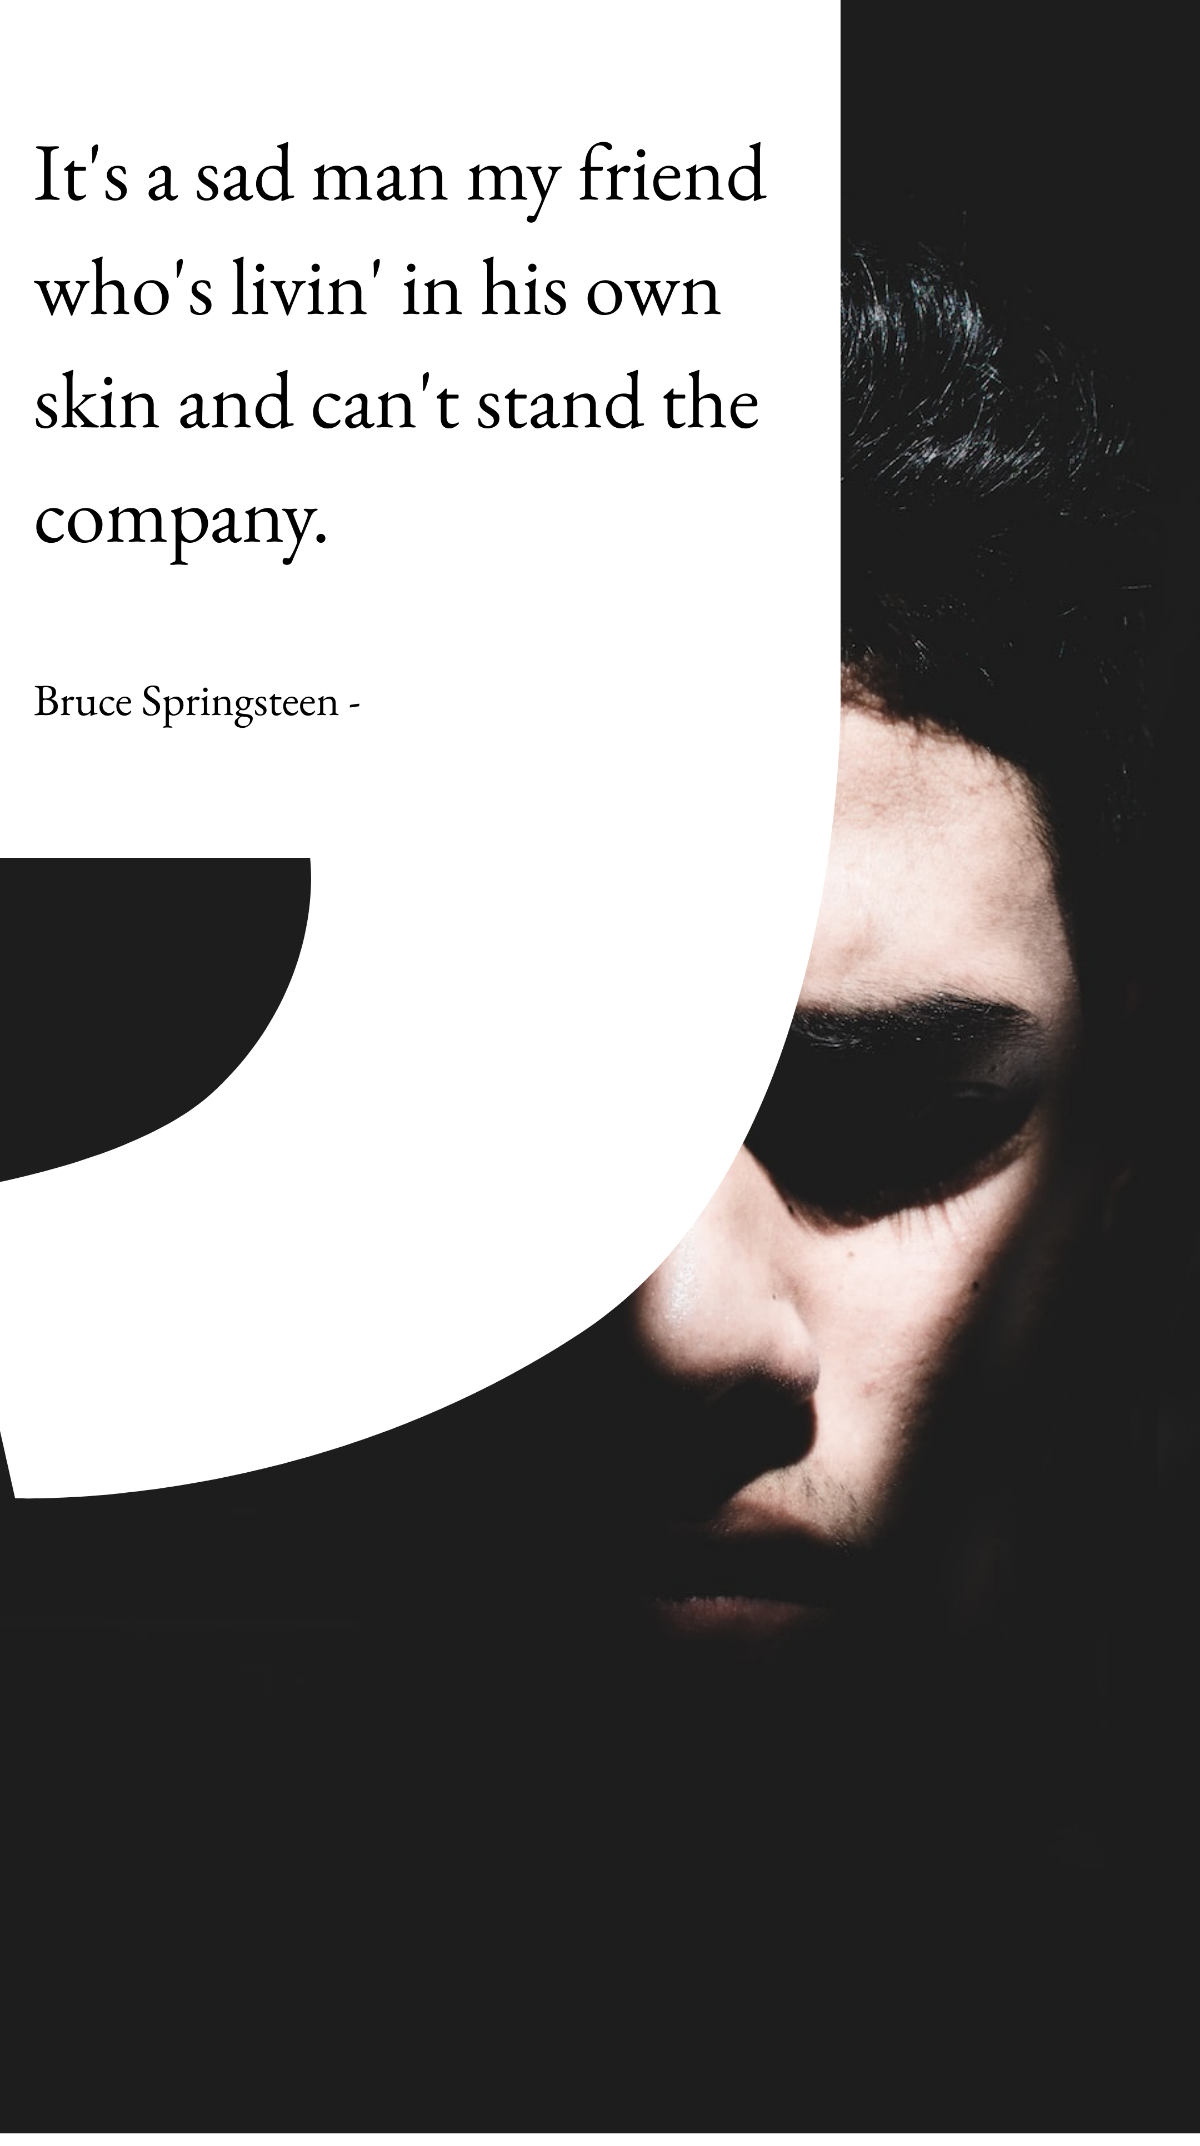 Bruce Springsteen - It's a sad man my friend who's livin' in his own skin and can't stand the company. Template